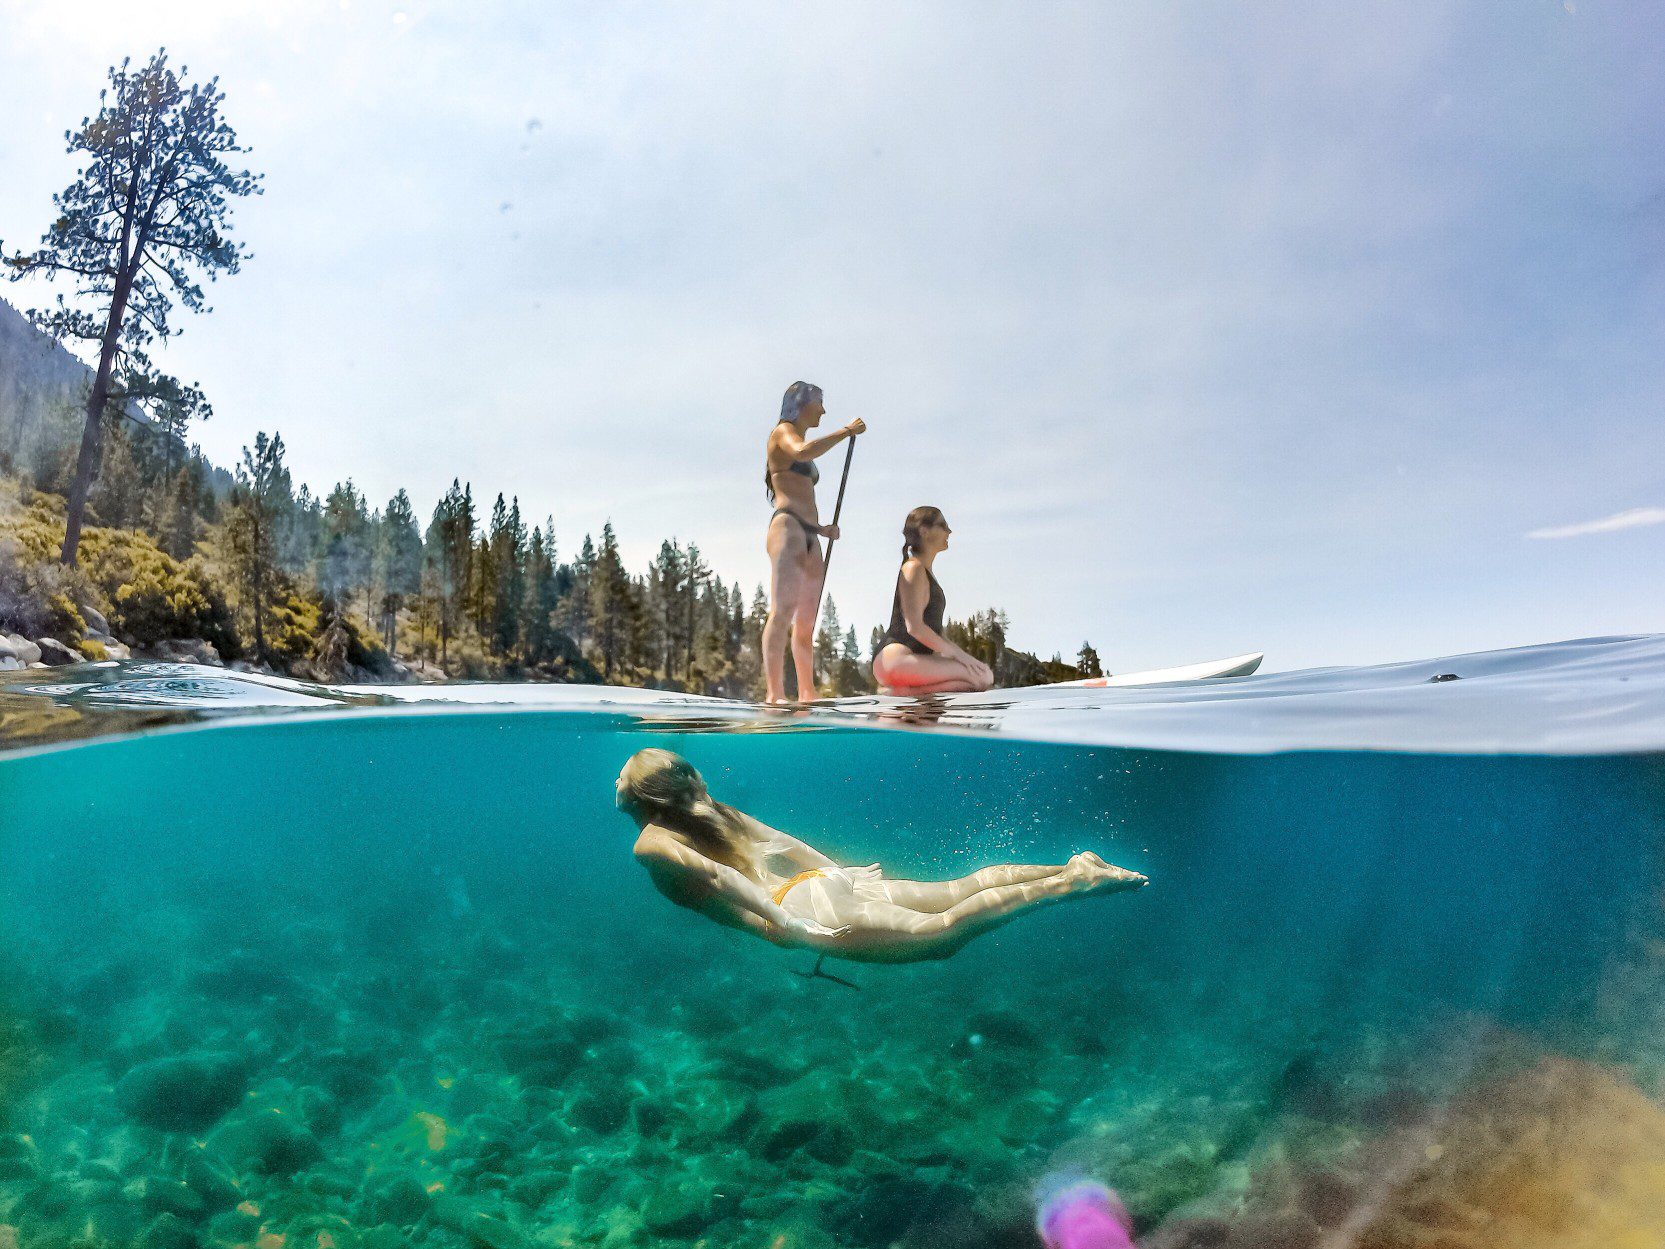 How Cold Is Lake Roosevelt, Washington (and Can I Swim in It)? - Drivin